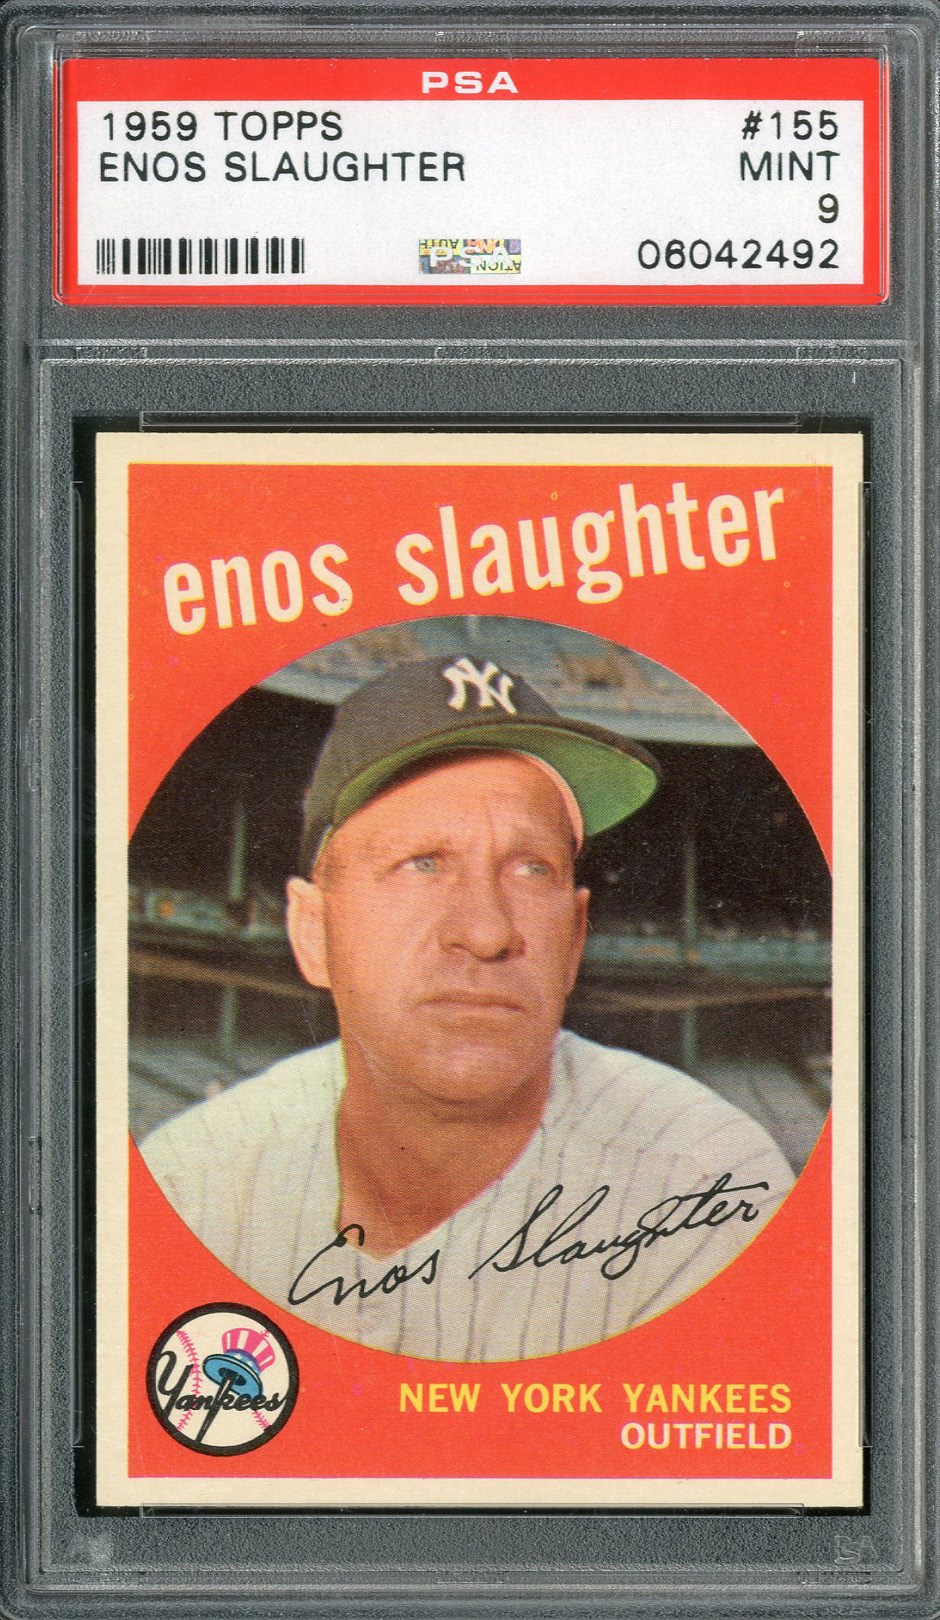 Baseball and Trading Cards - 1959 Topps #155 Enos Slaughter PSA MINT 9